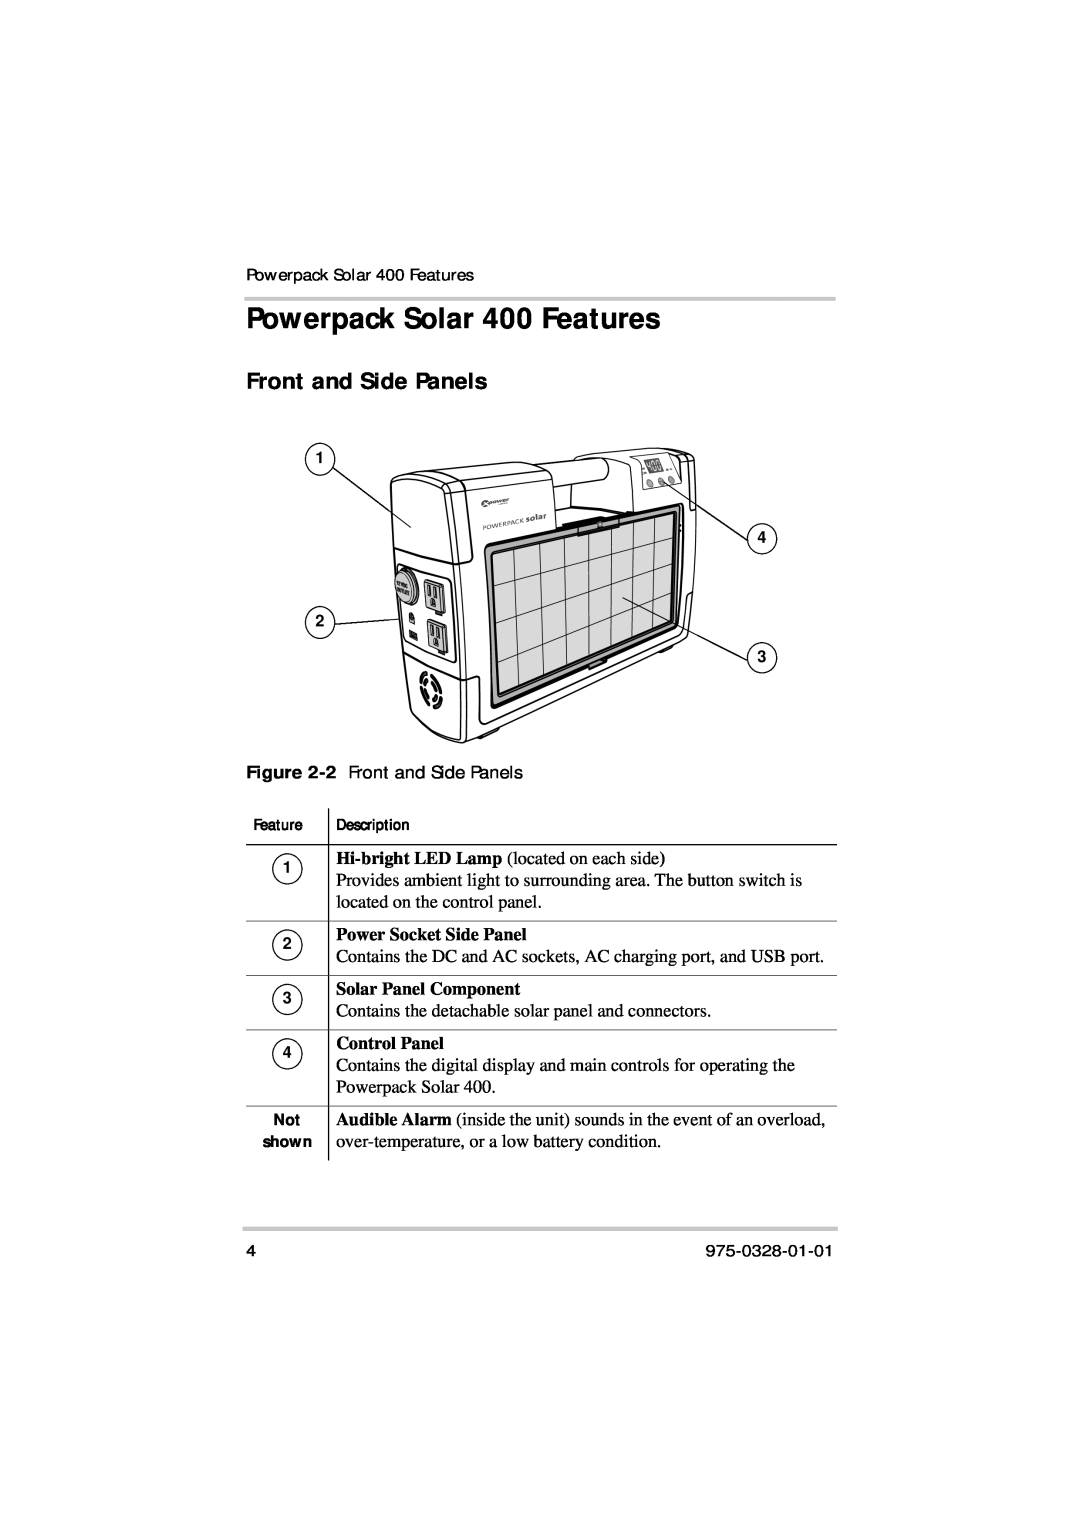 Xantrex Technology Powerpack Solar 400 Features, 2 Front and Side Panels, Description, Power Socket Side Panel 